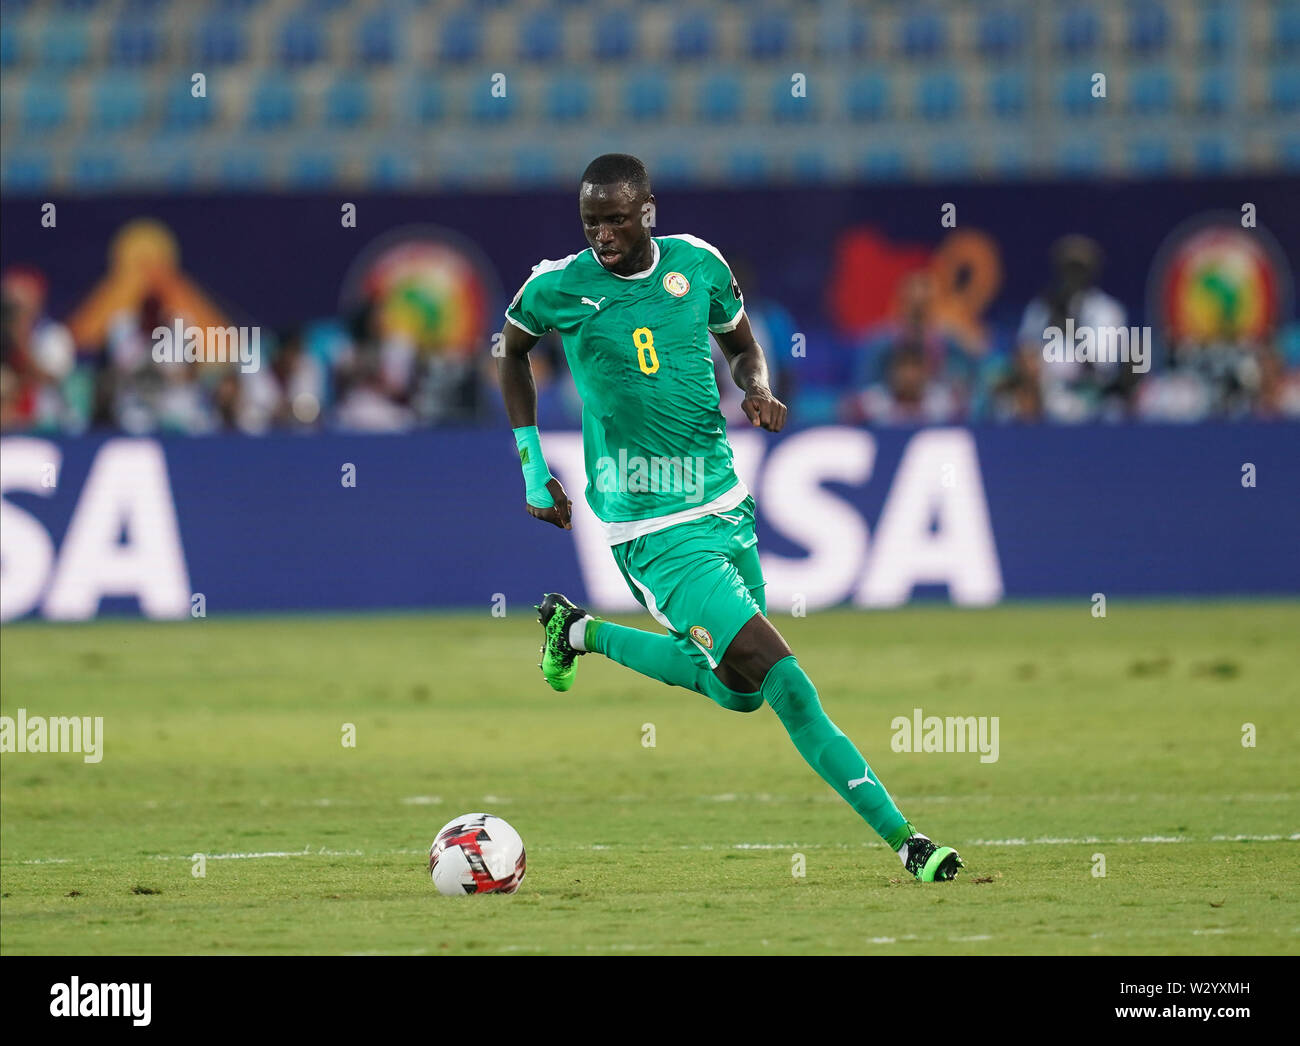 Cairo, Senegal, Egypt. 10th July, 2019. FRANCE OUT July 10, 2019: Cheikhou Kouyate of Senegal during the 2019 African Cup of Nations match between Senegal and Benin at the 30 June Stadium in Cairo, Egypt. Ulrik Pedersen/CSM/Alamy Live News Stock Photo